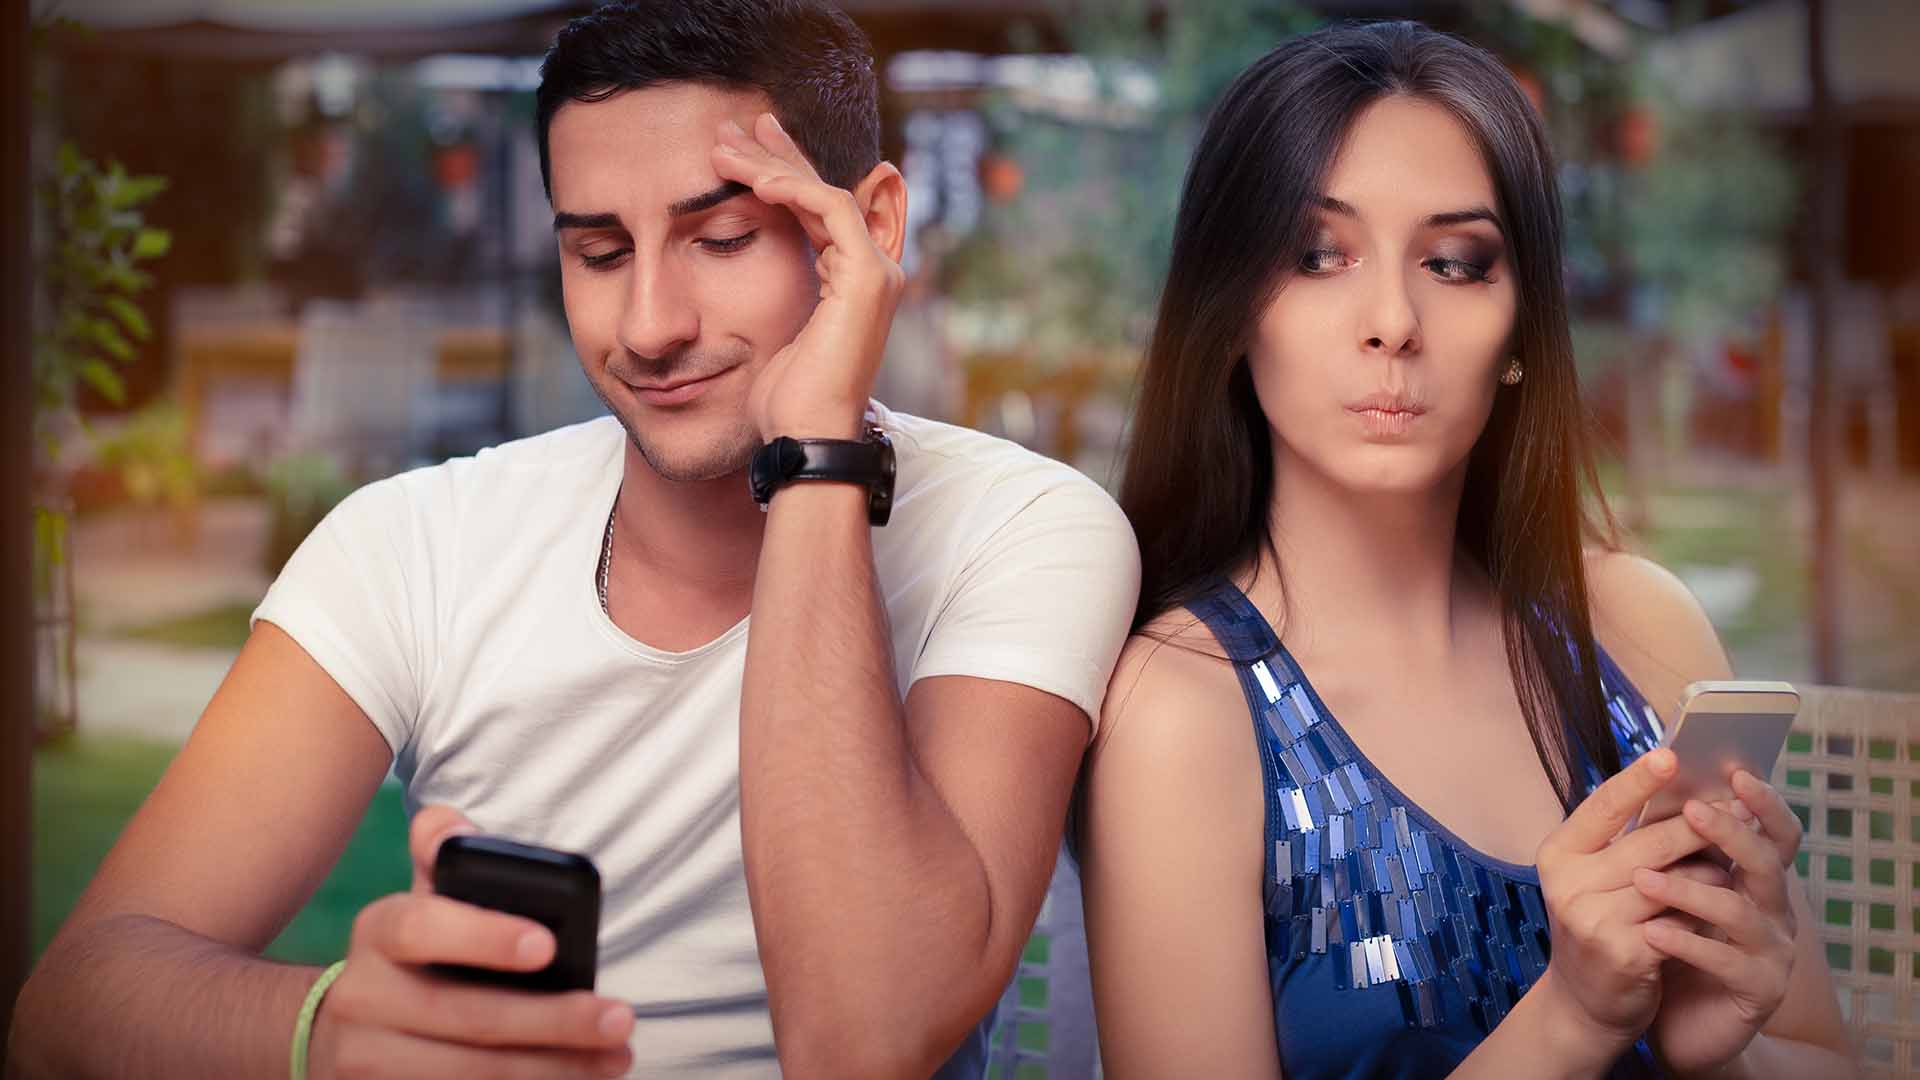 Brunette man in white shirt and brunette woman in blue shirt, sitting back to back and holding their phones.